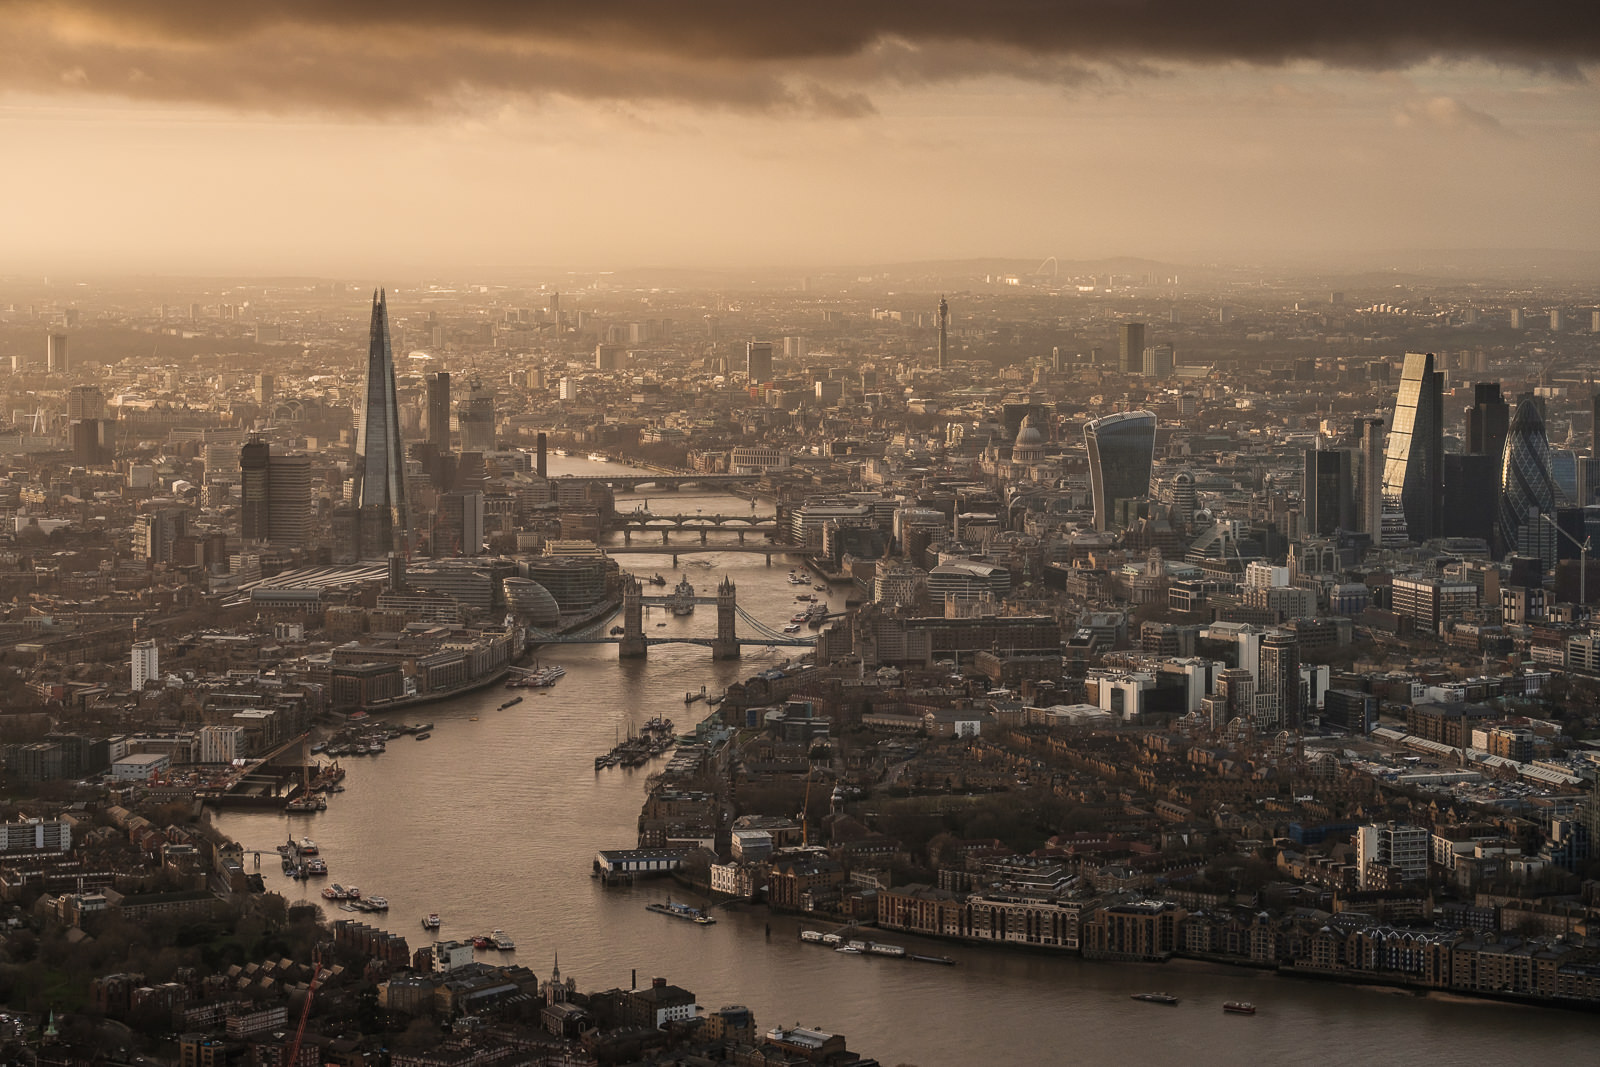 London from helicopter with Fuji X-T2 and X-Pro2